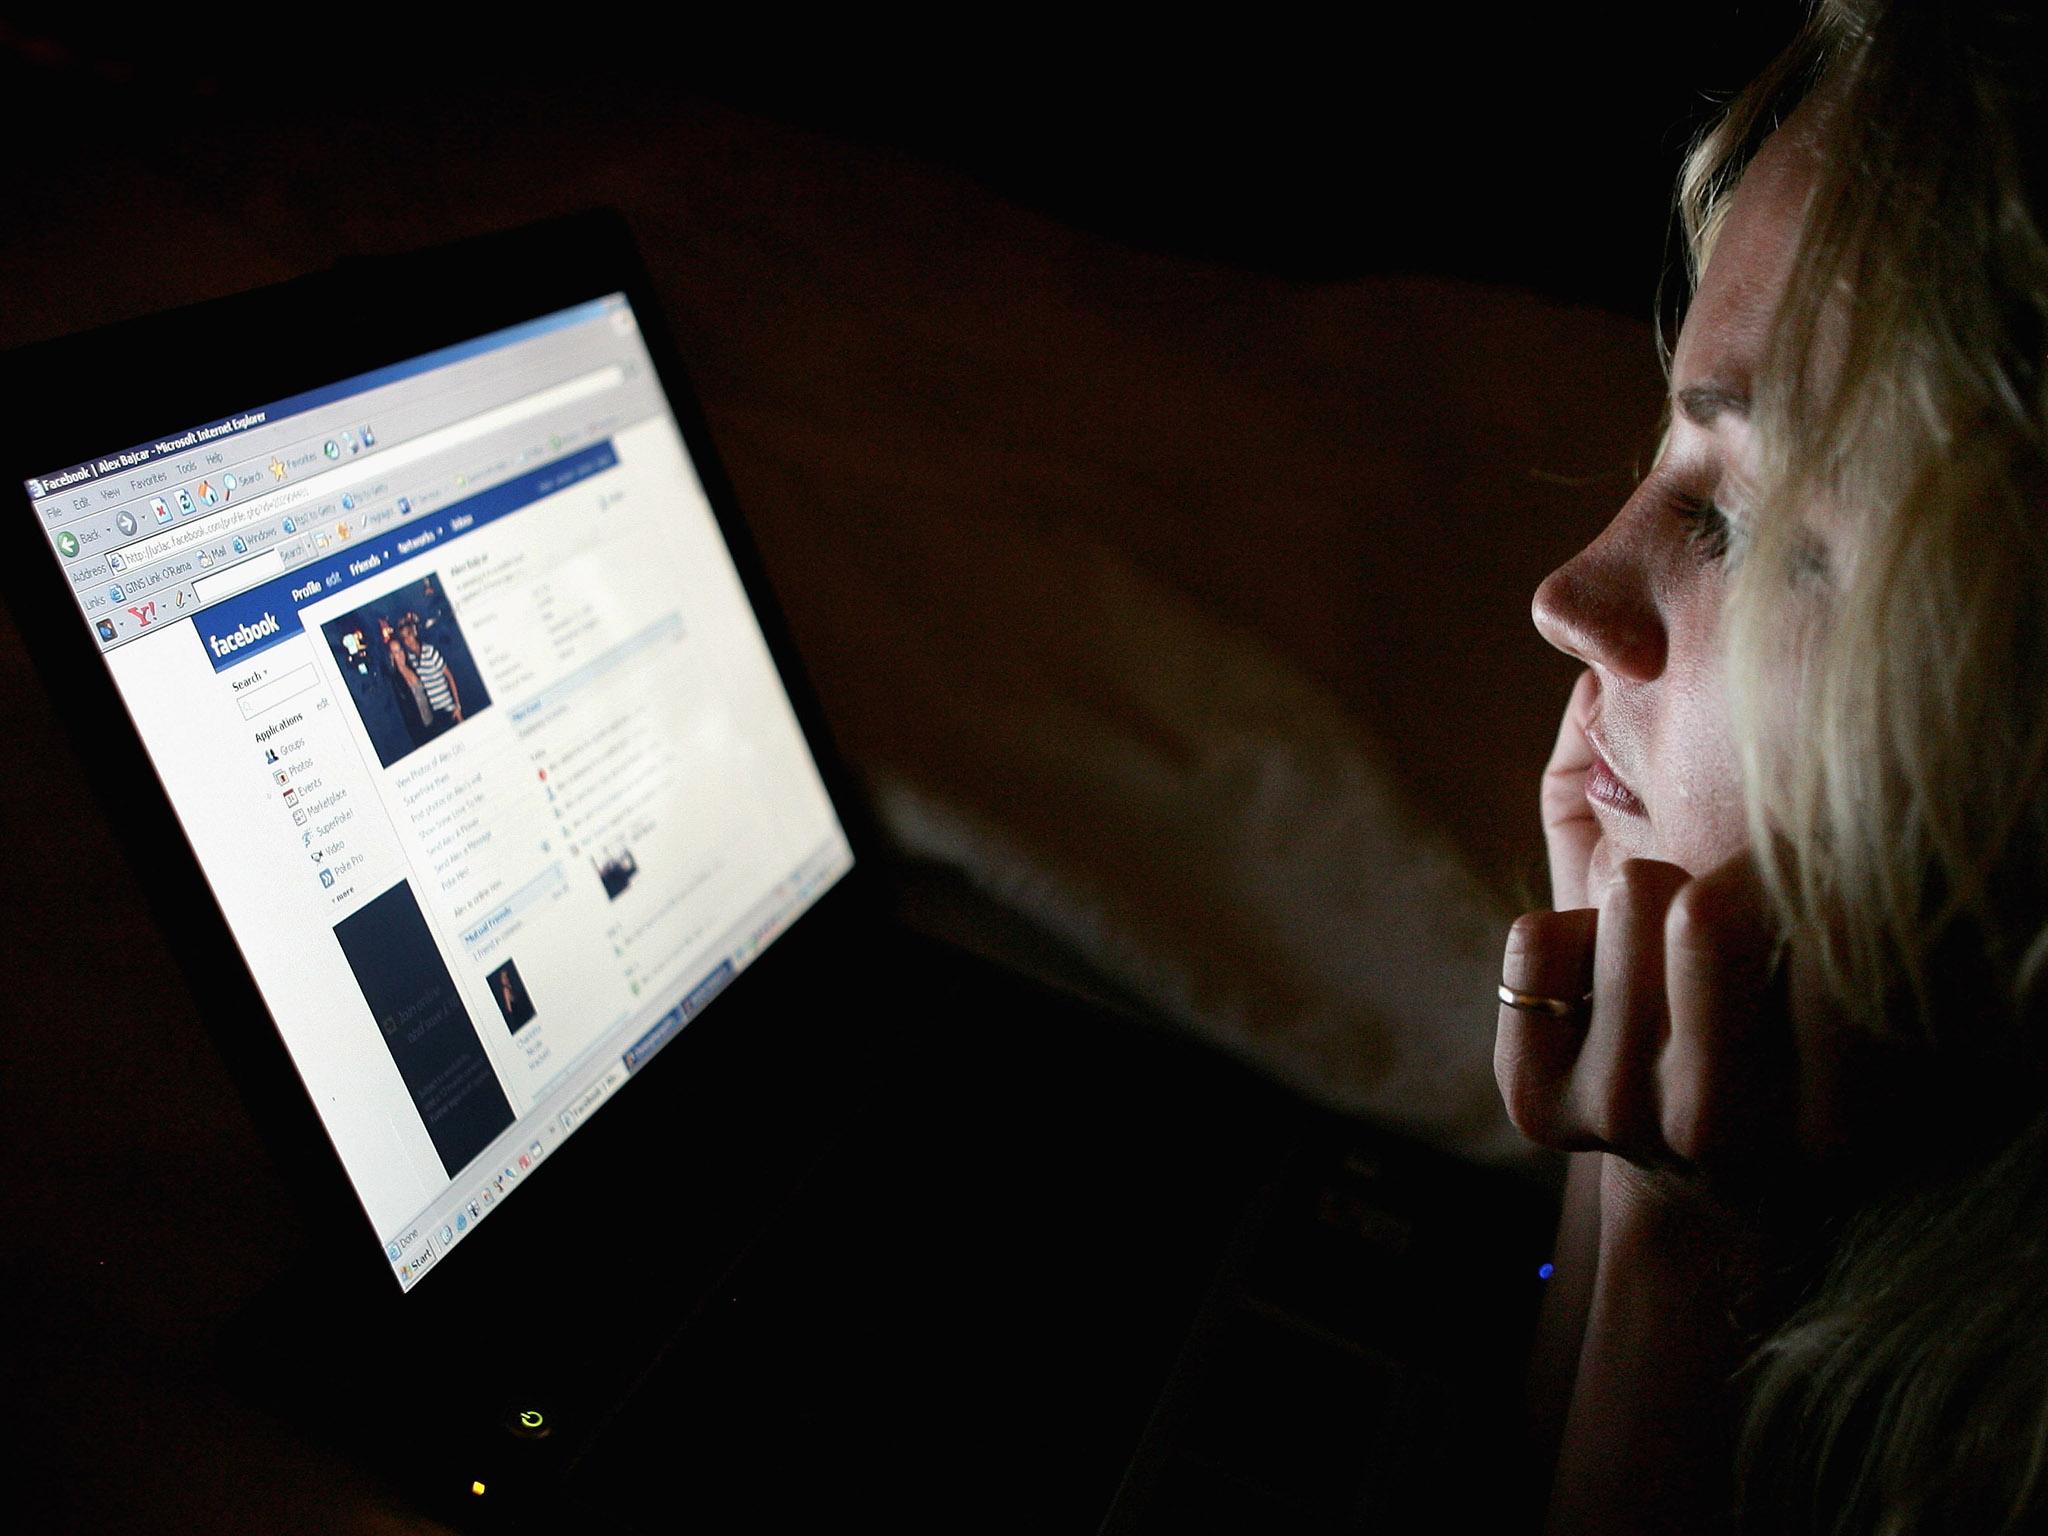 Social media increases loneliness, the latest study by the University of Pittsburgh found